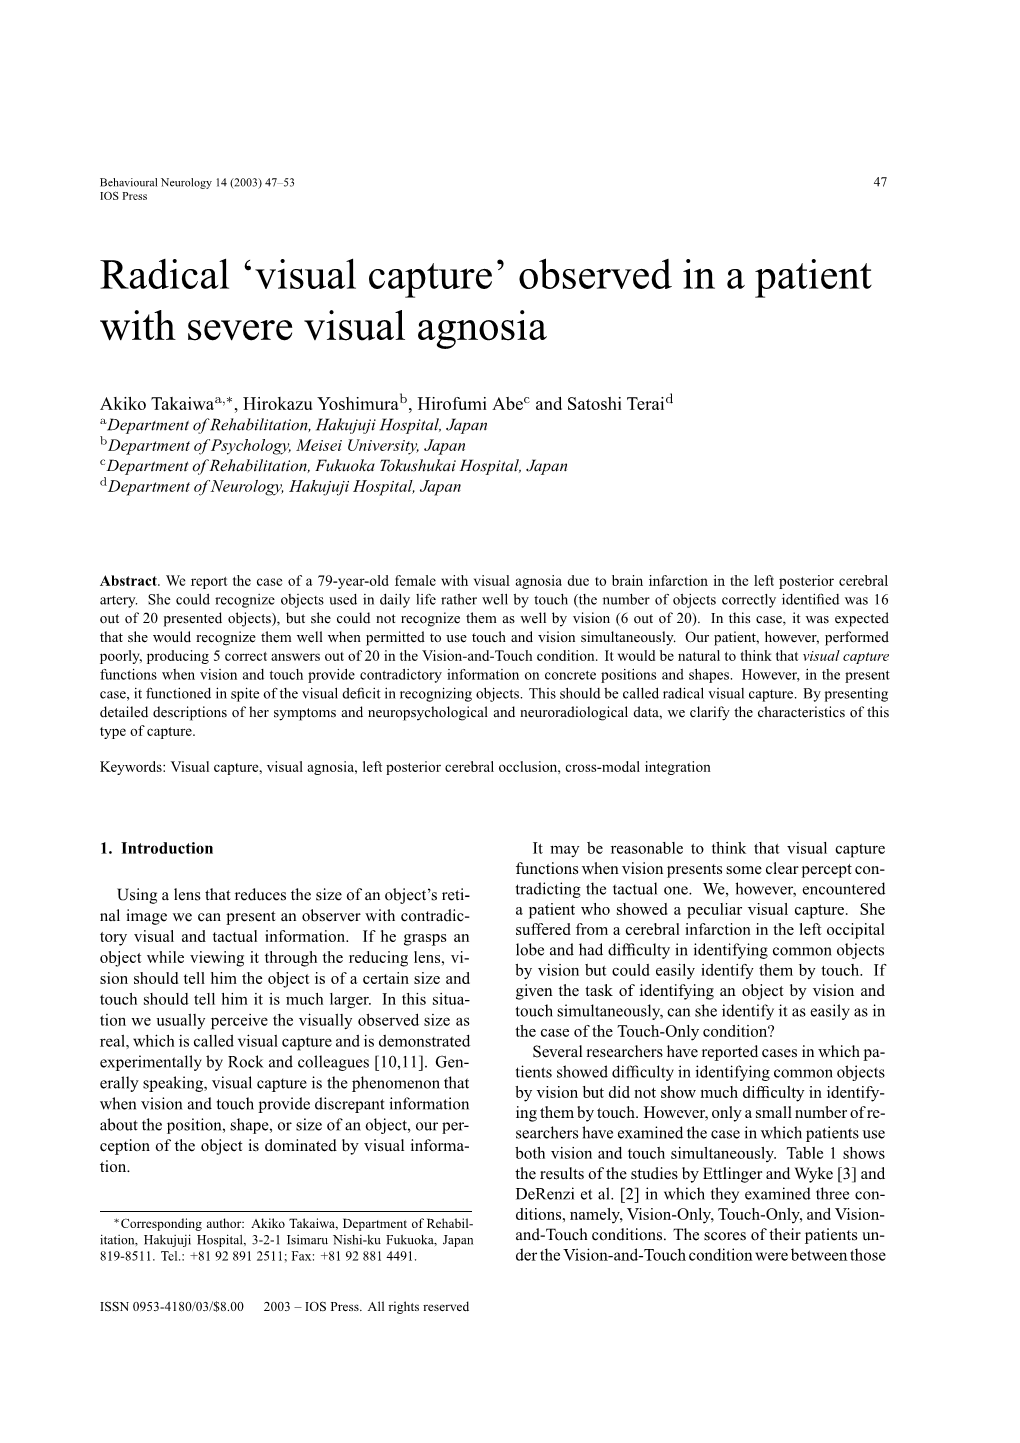 Radical 'Visual Capture' Observed in a Patient with Severe Visual Agnosia